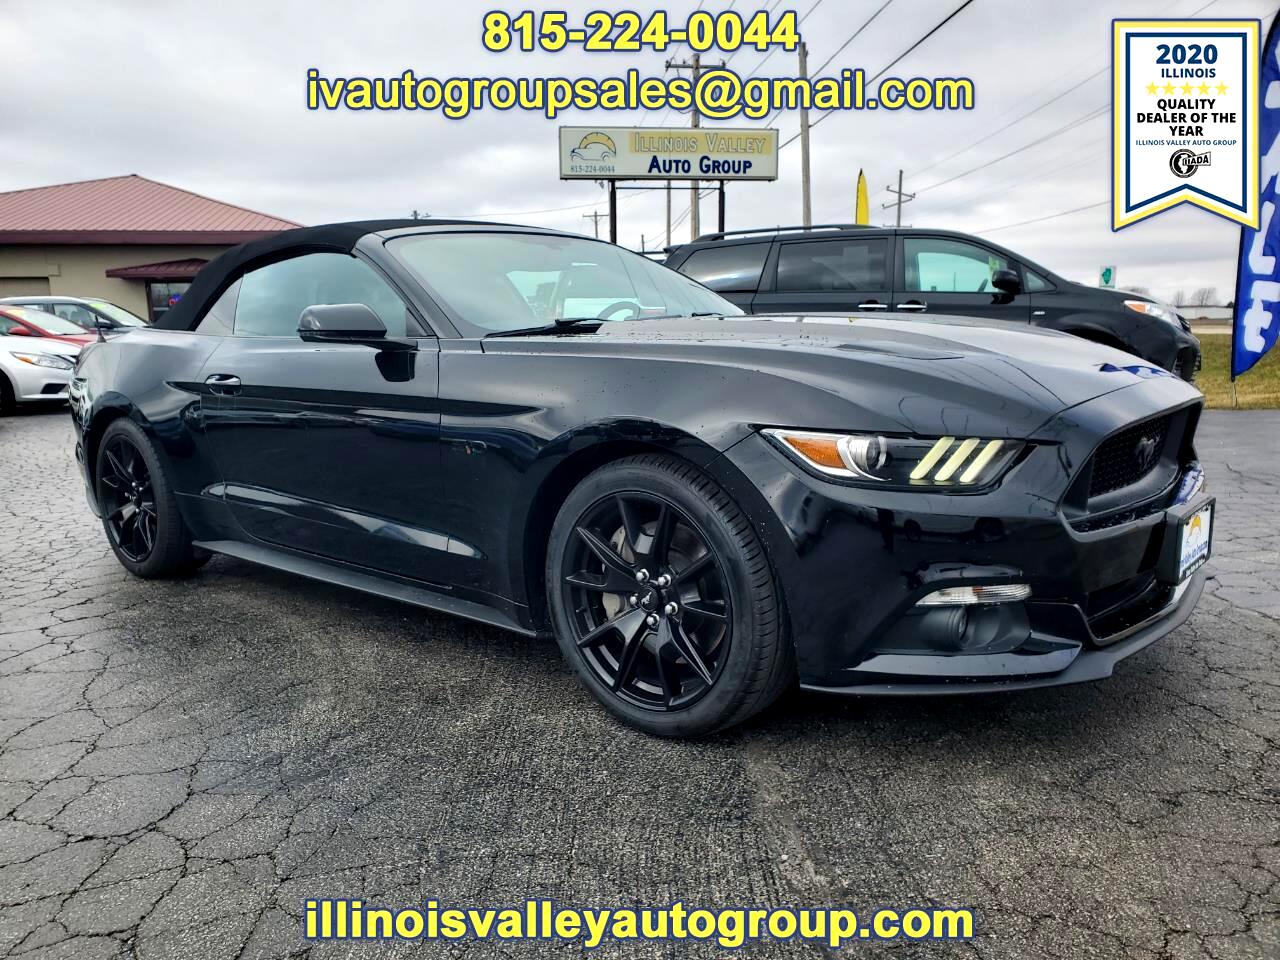 Ford Mustang 2dr Conv GT Premium 2017